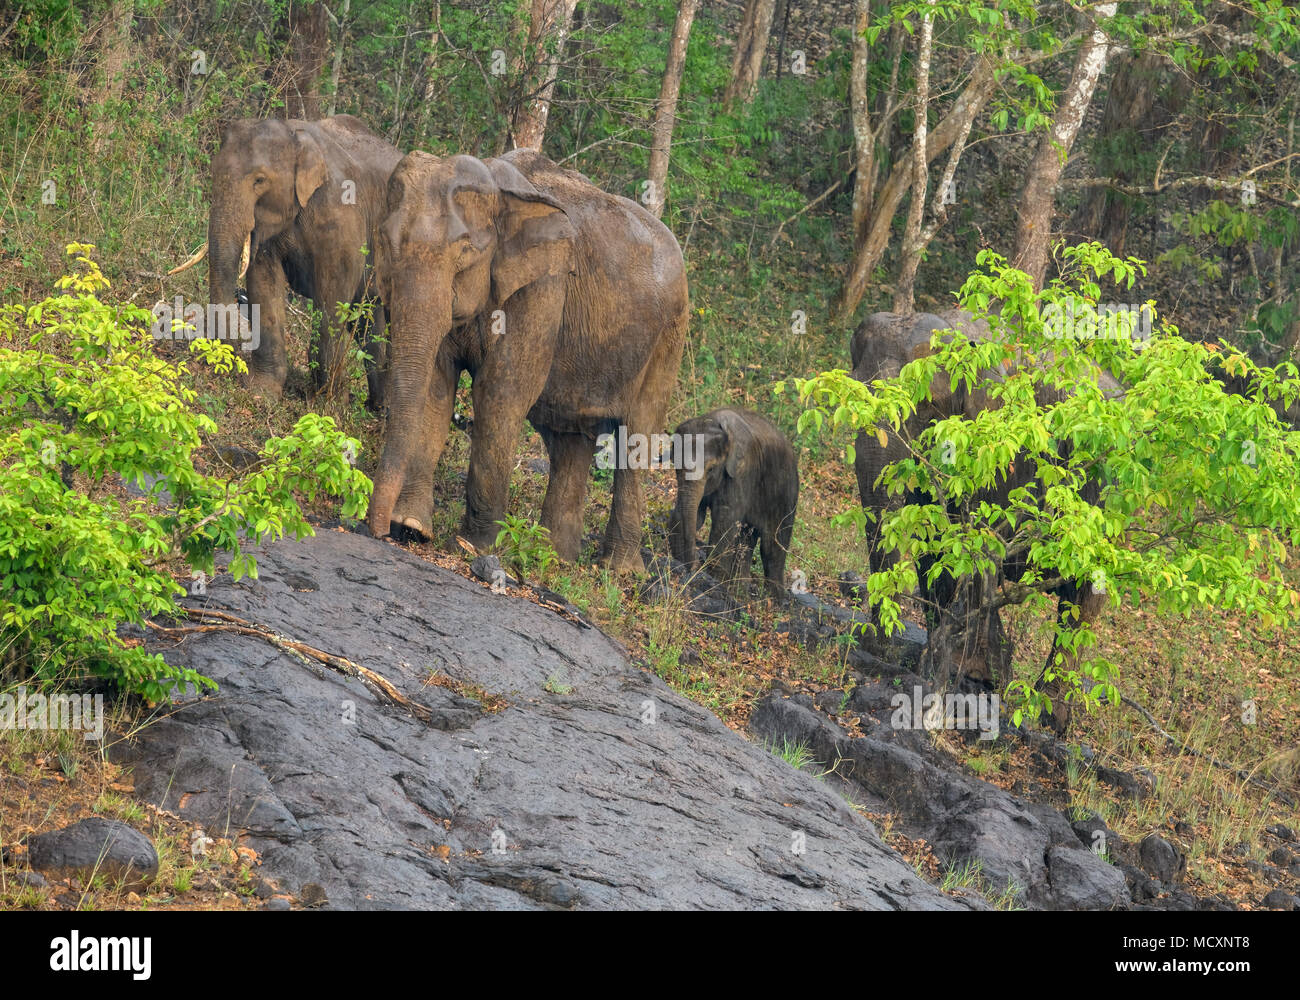 Wild Indian or Asian Elephants in its natural habitat or forest in Periyar nature reserve Thekkady Kerala India.  mother and child Stock Photo